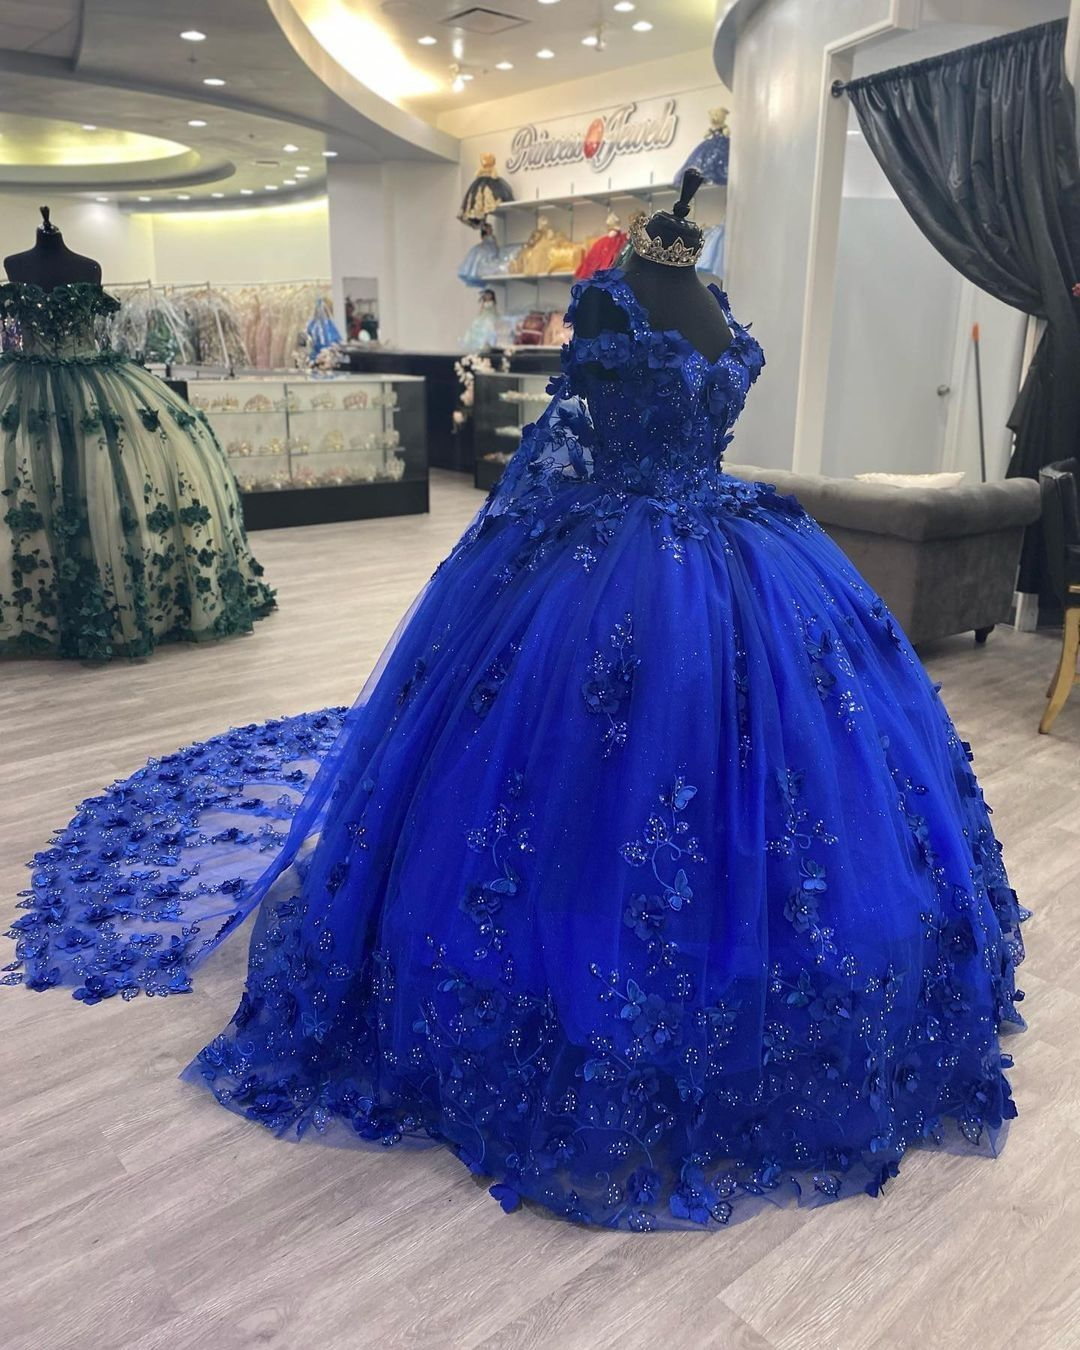 Royal Blue Sweet 16 Princess Ball Gown Quinceanera Dresses with Train for Girls Prom Party Evening Long,Y2479